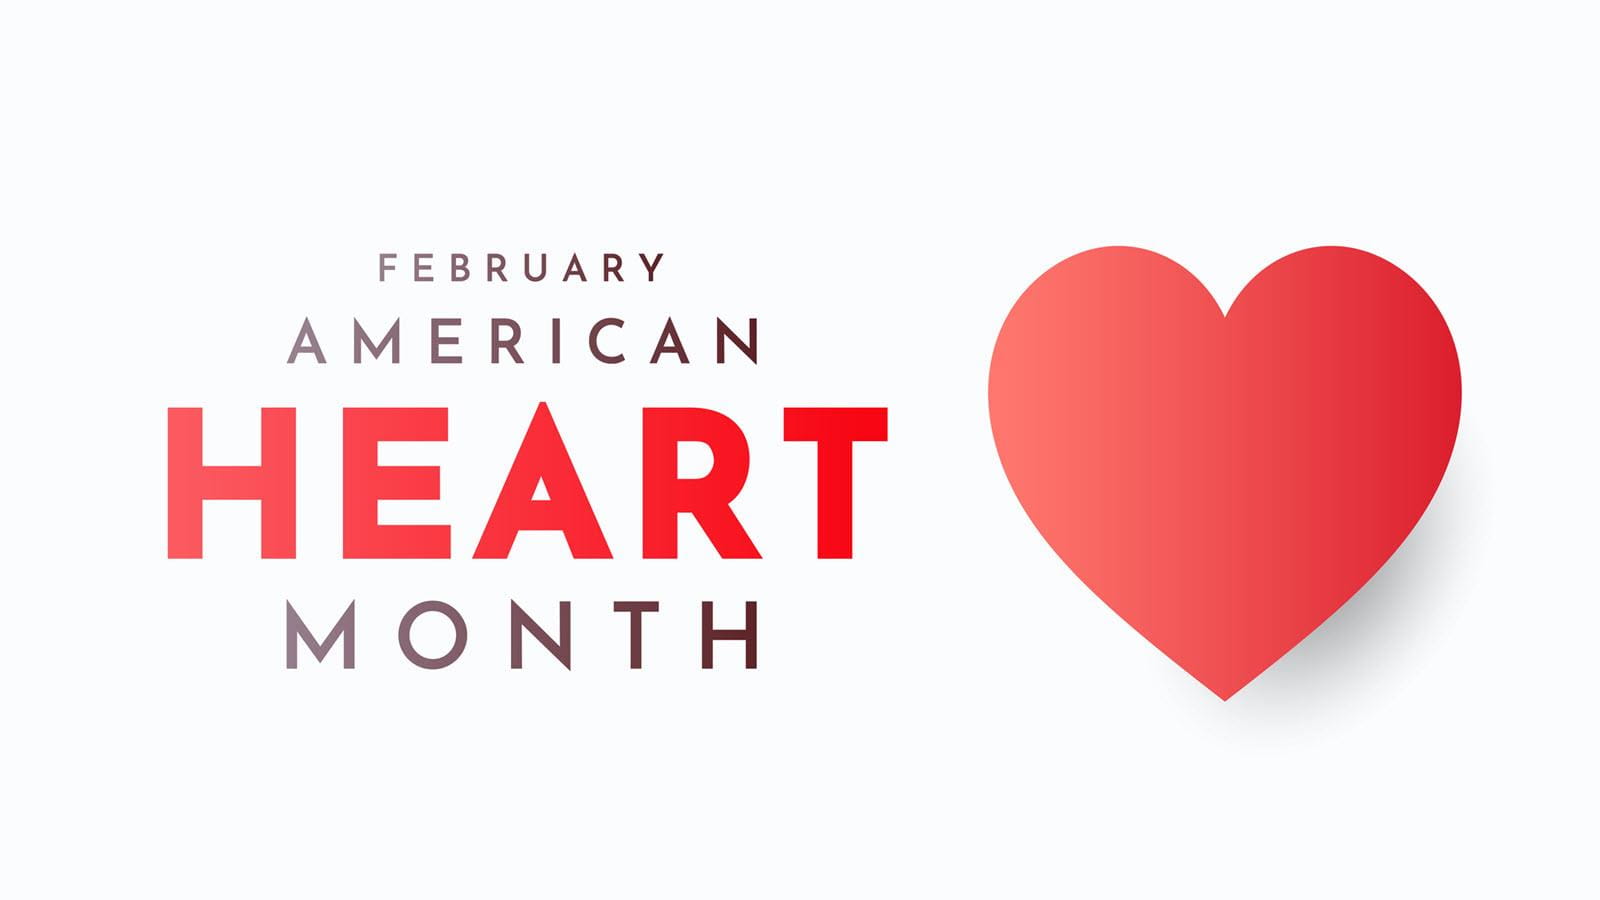 February is American Heart Month with a red heart